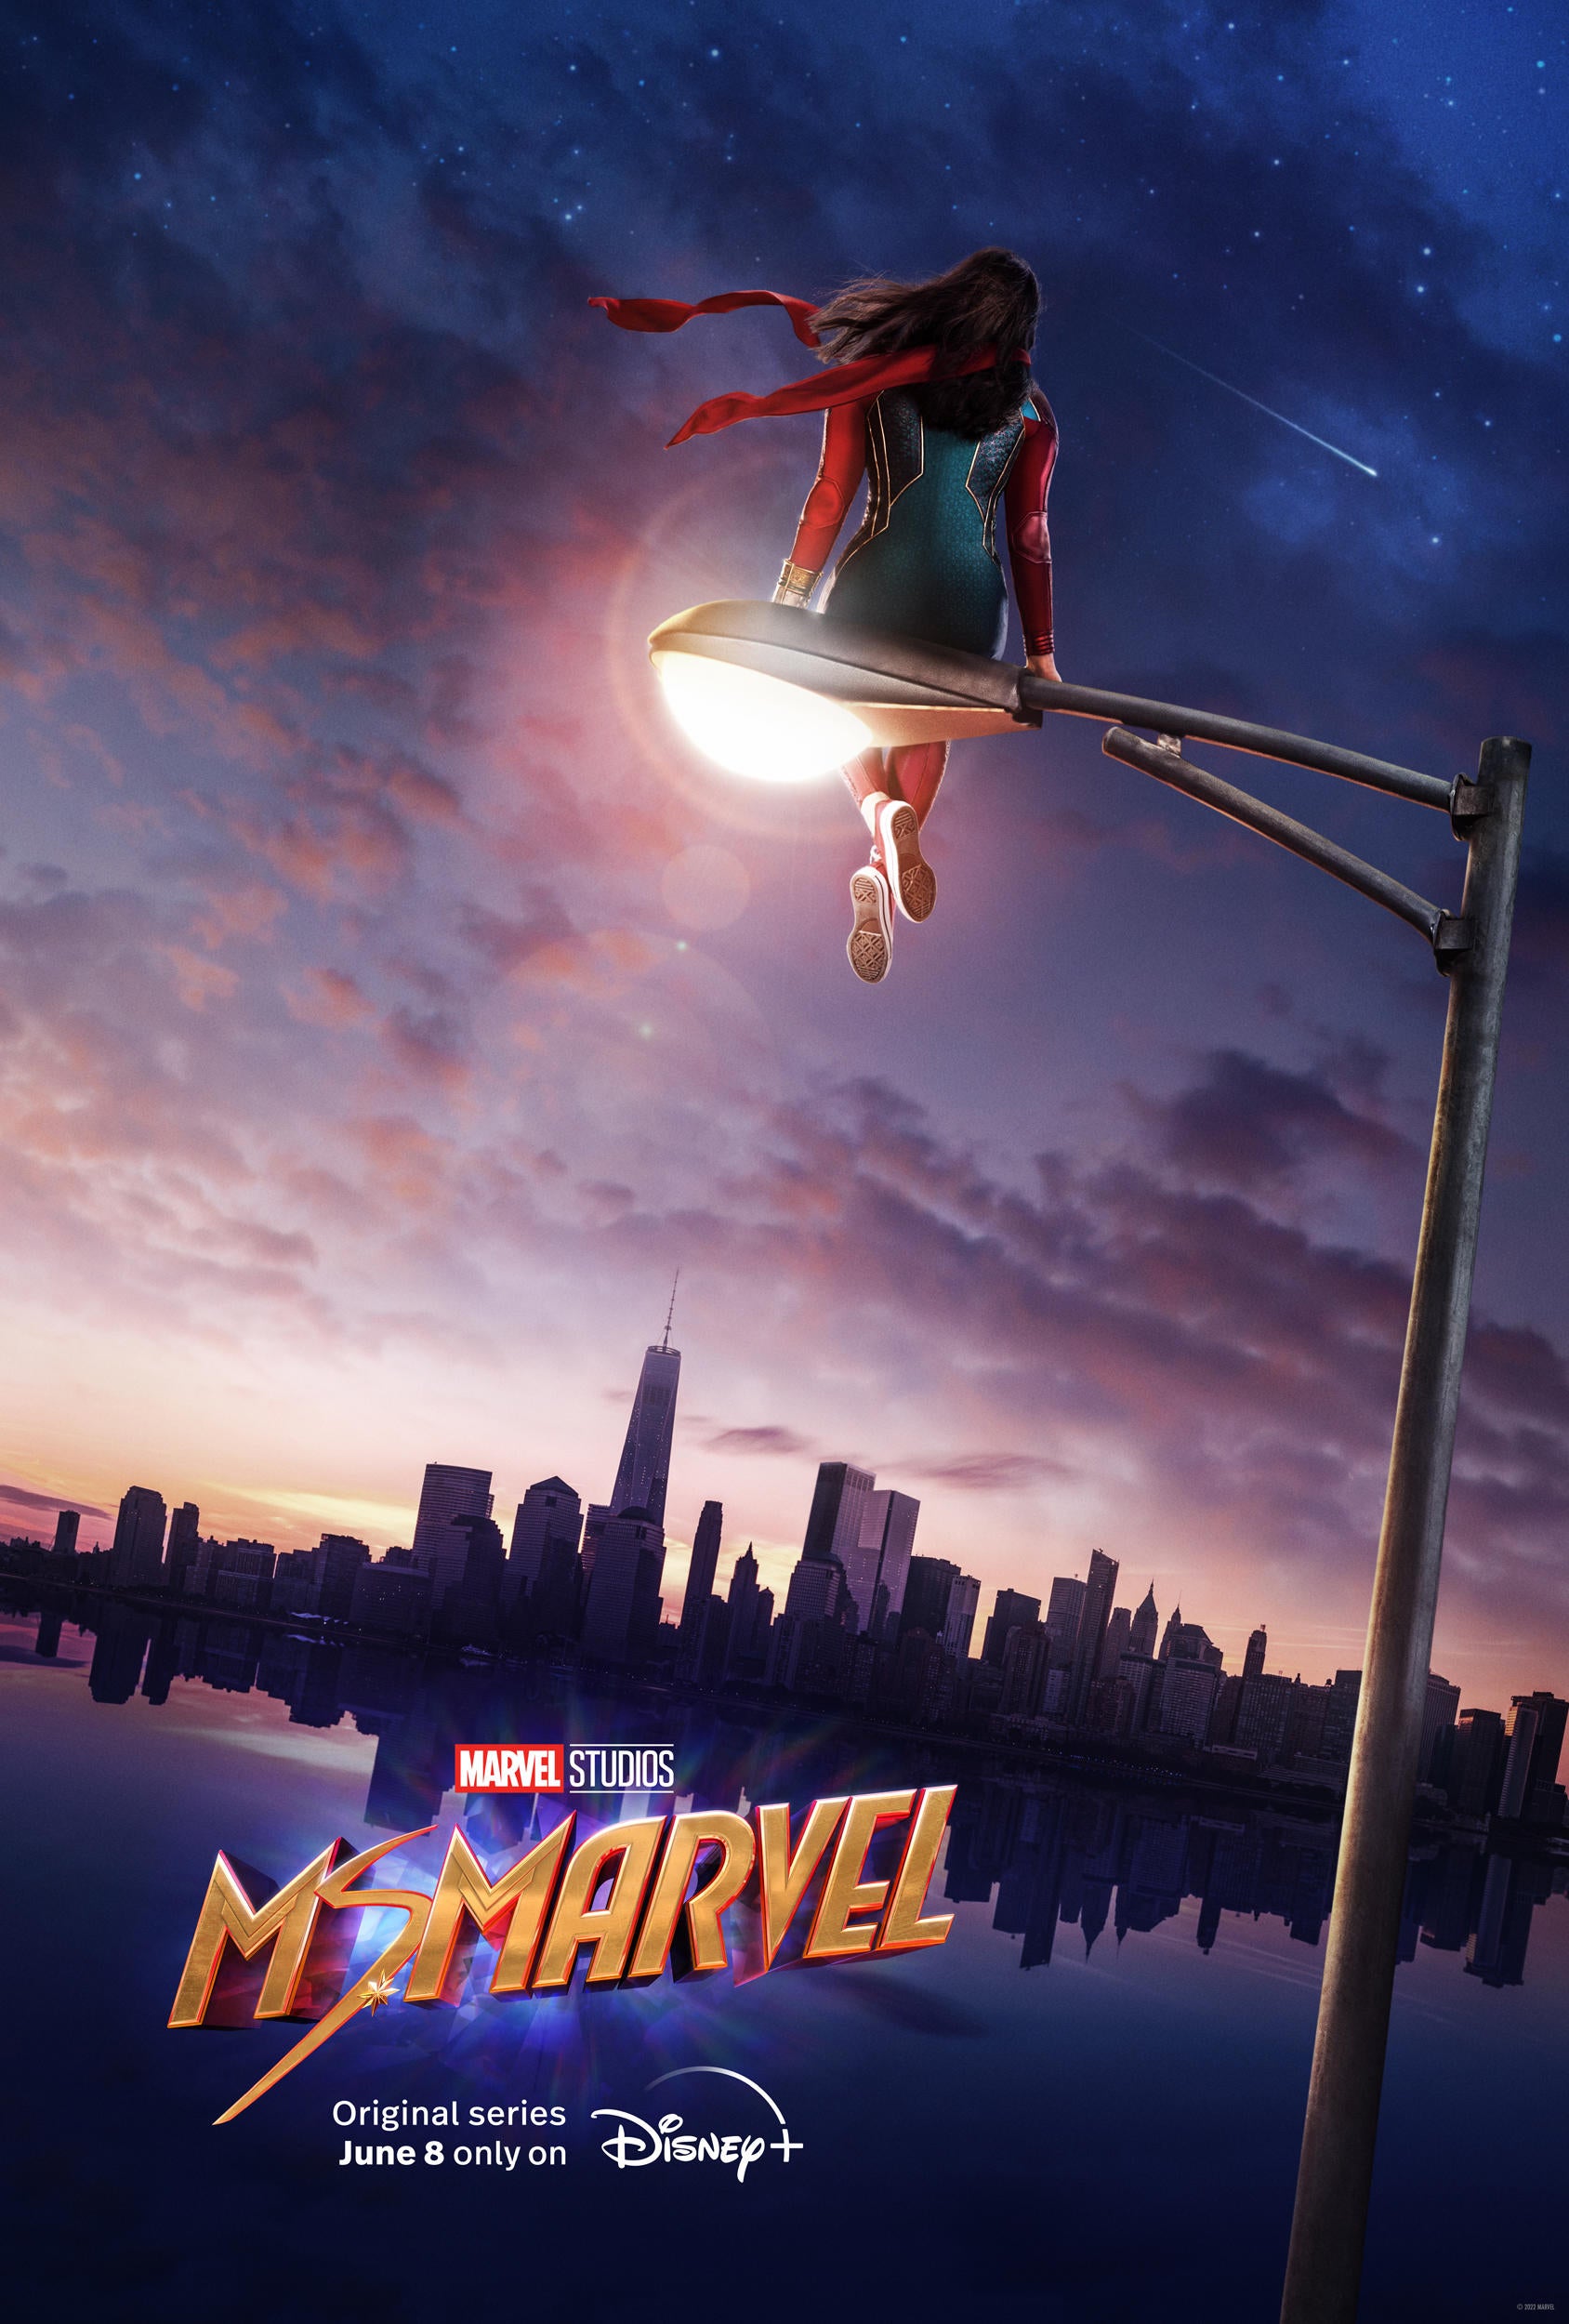 Ms. Marvel Poster Released By Disney+